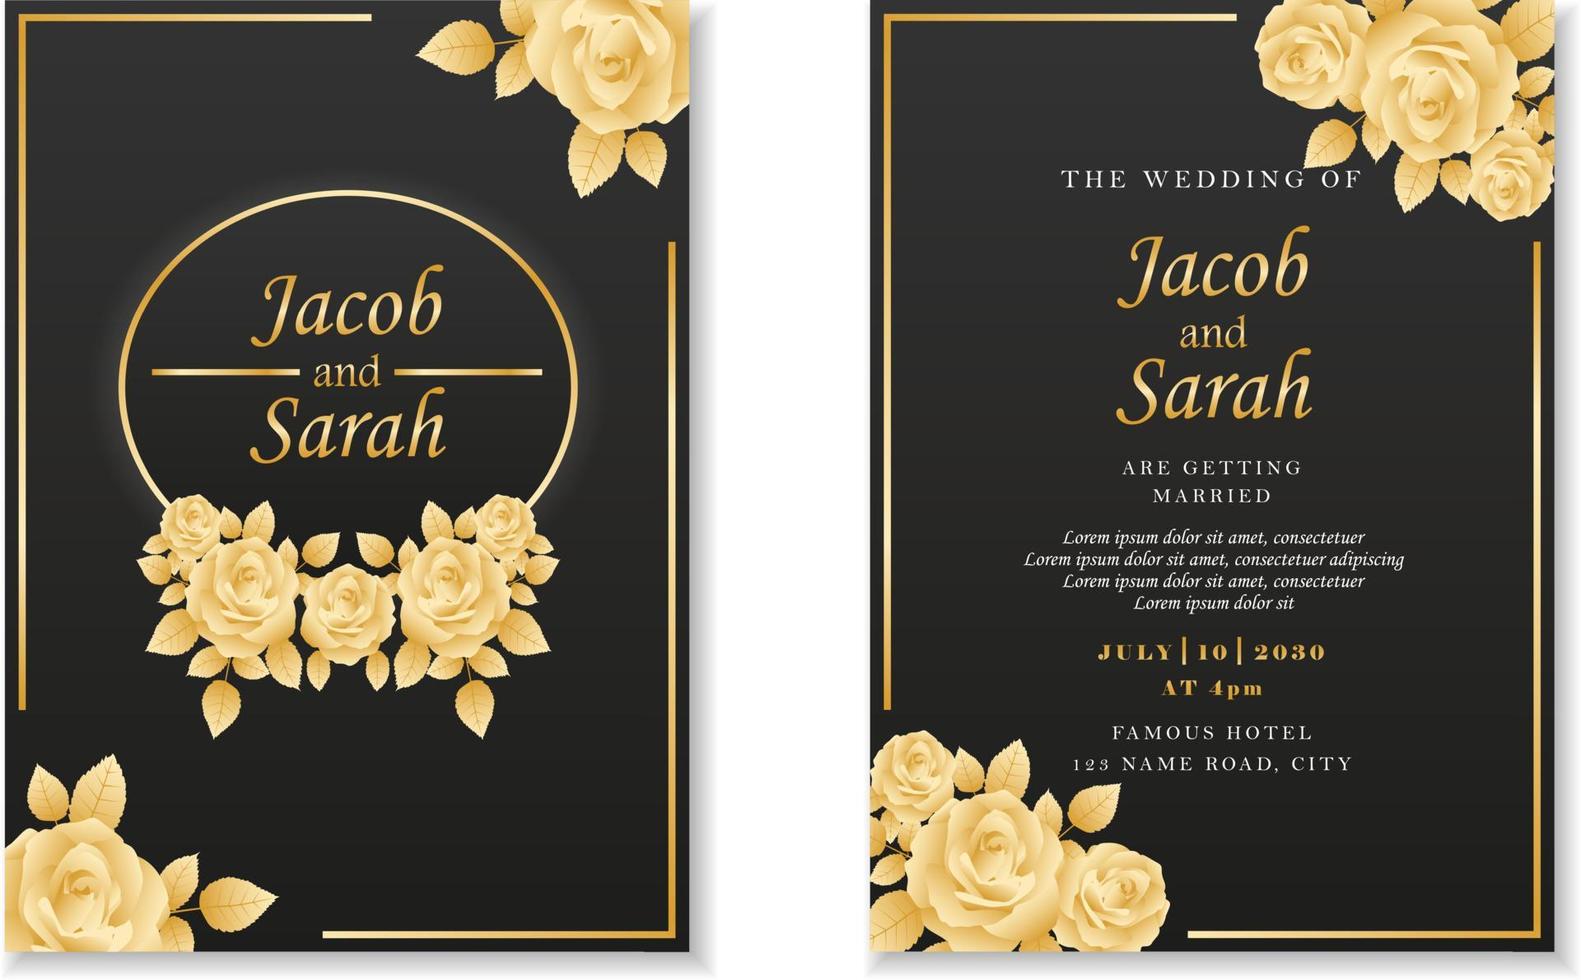 royal wedding card black template with gold rose floral frame by vector design